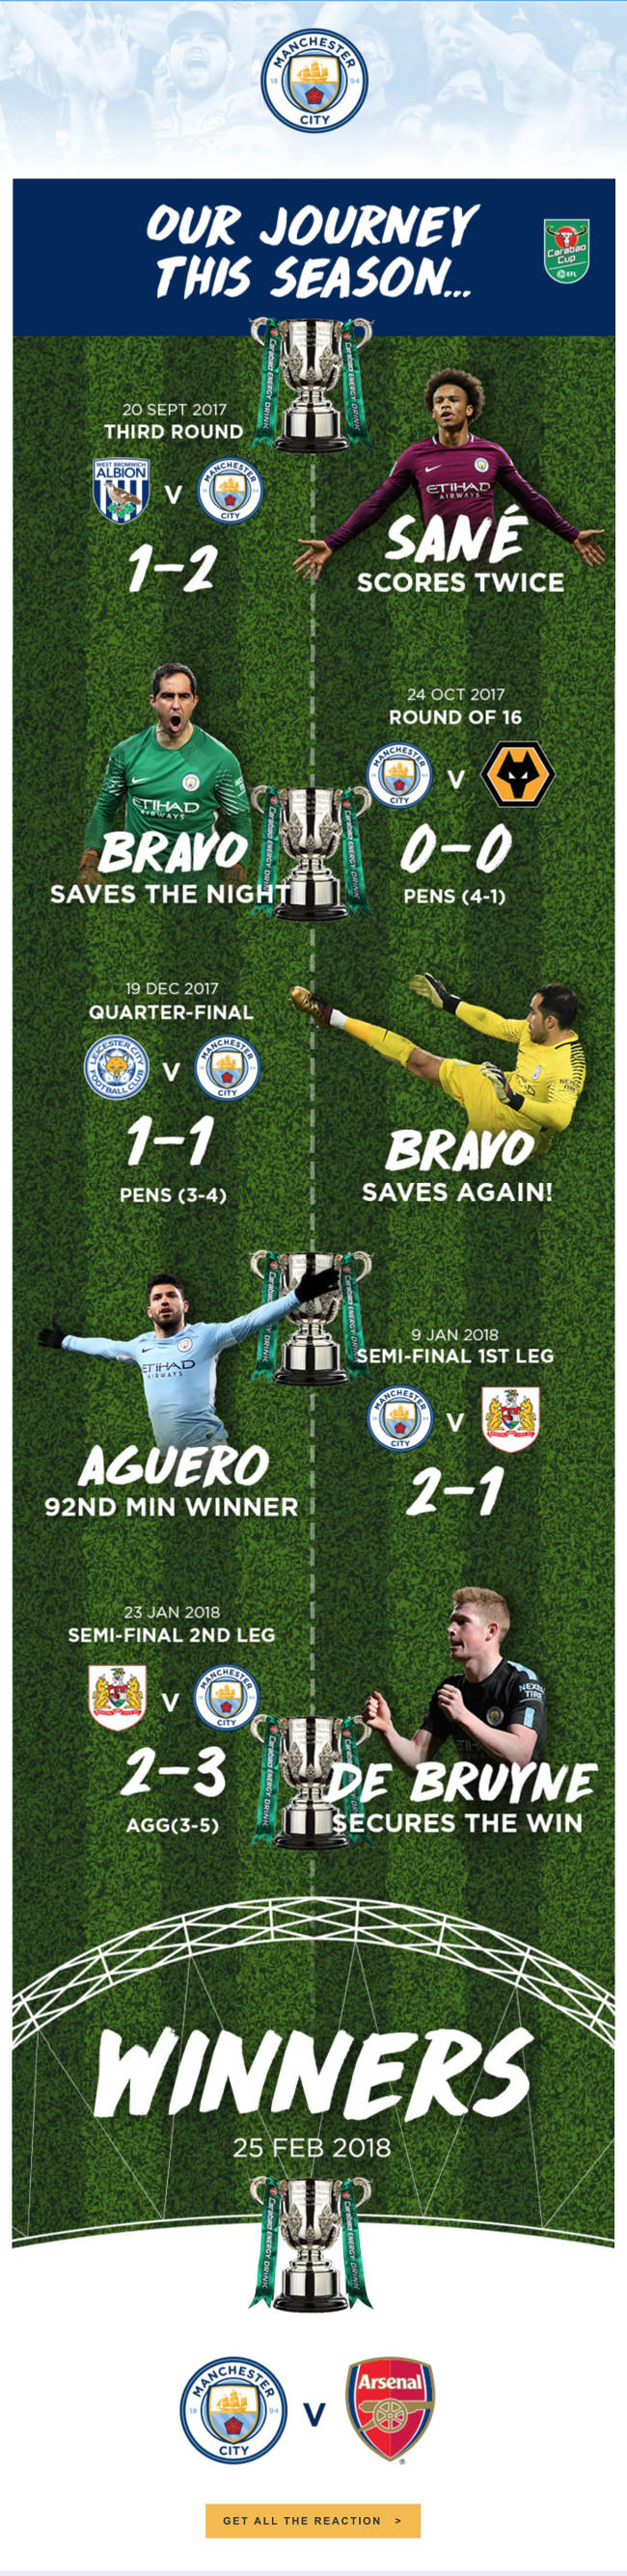 Manchester City presenting their newsletter as infographic with scores and statistics